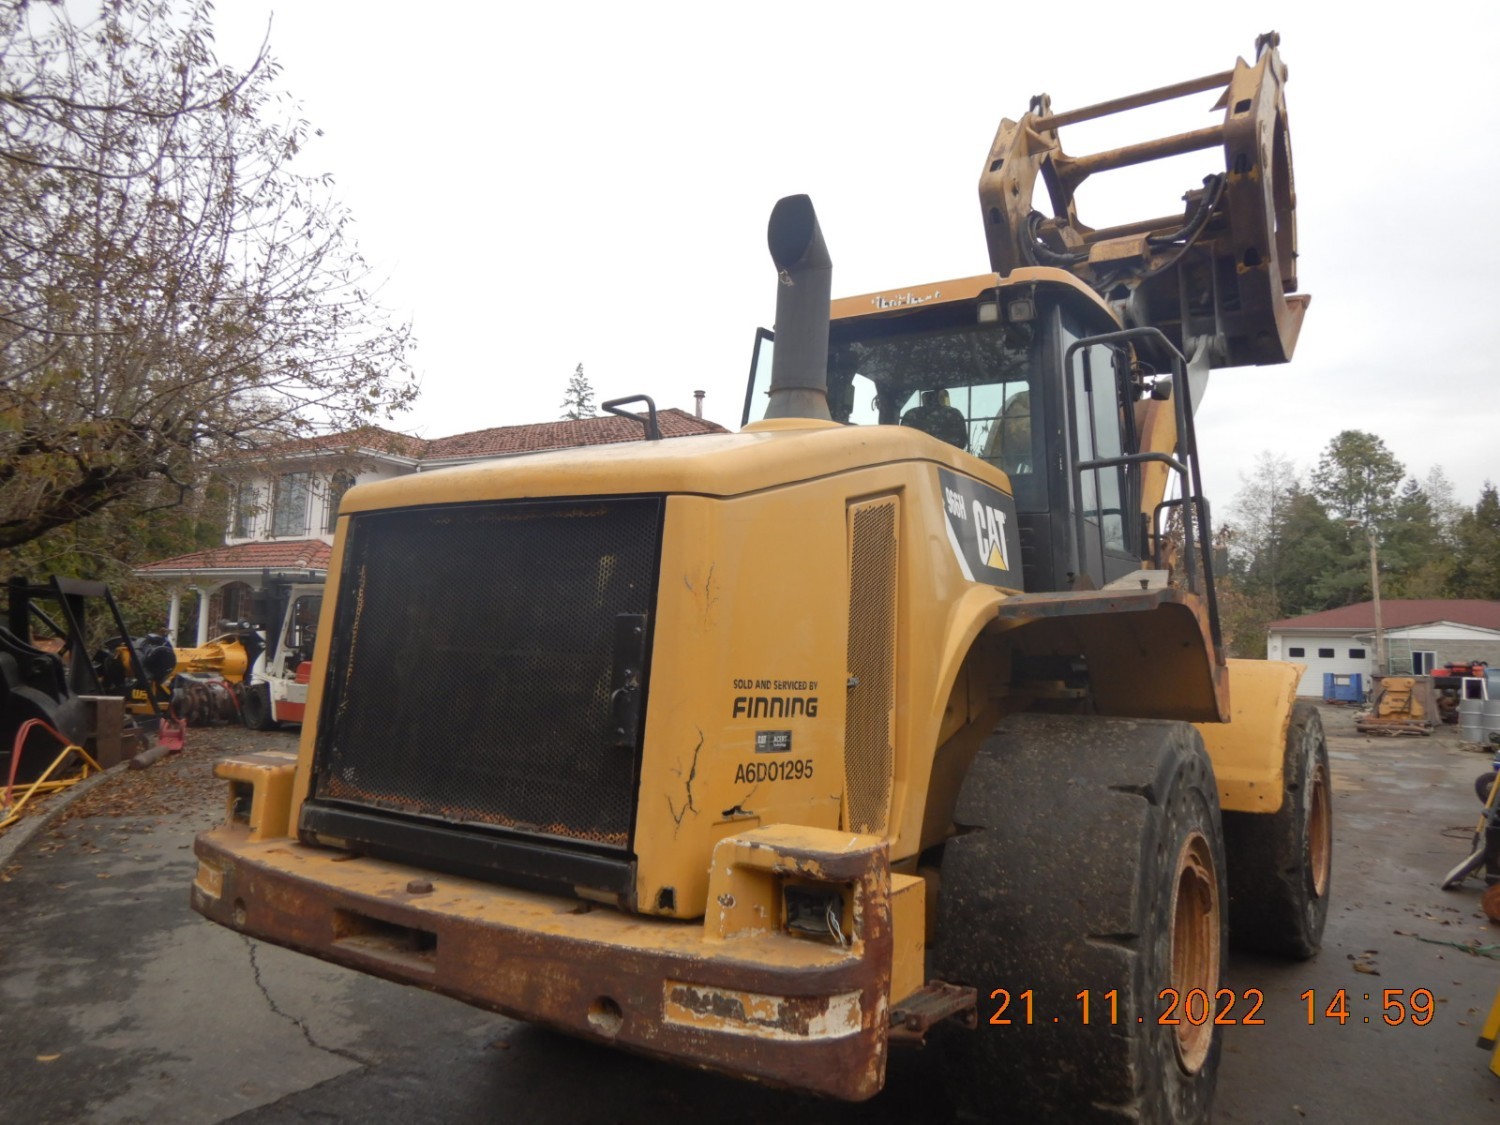 sold-2010-cat-966h-cw-custom-daequip-dual-log-or-pipe-grapple-with-internal-grapple-to-keep-pipe-logs-poles-secure-big-6